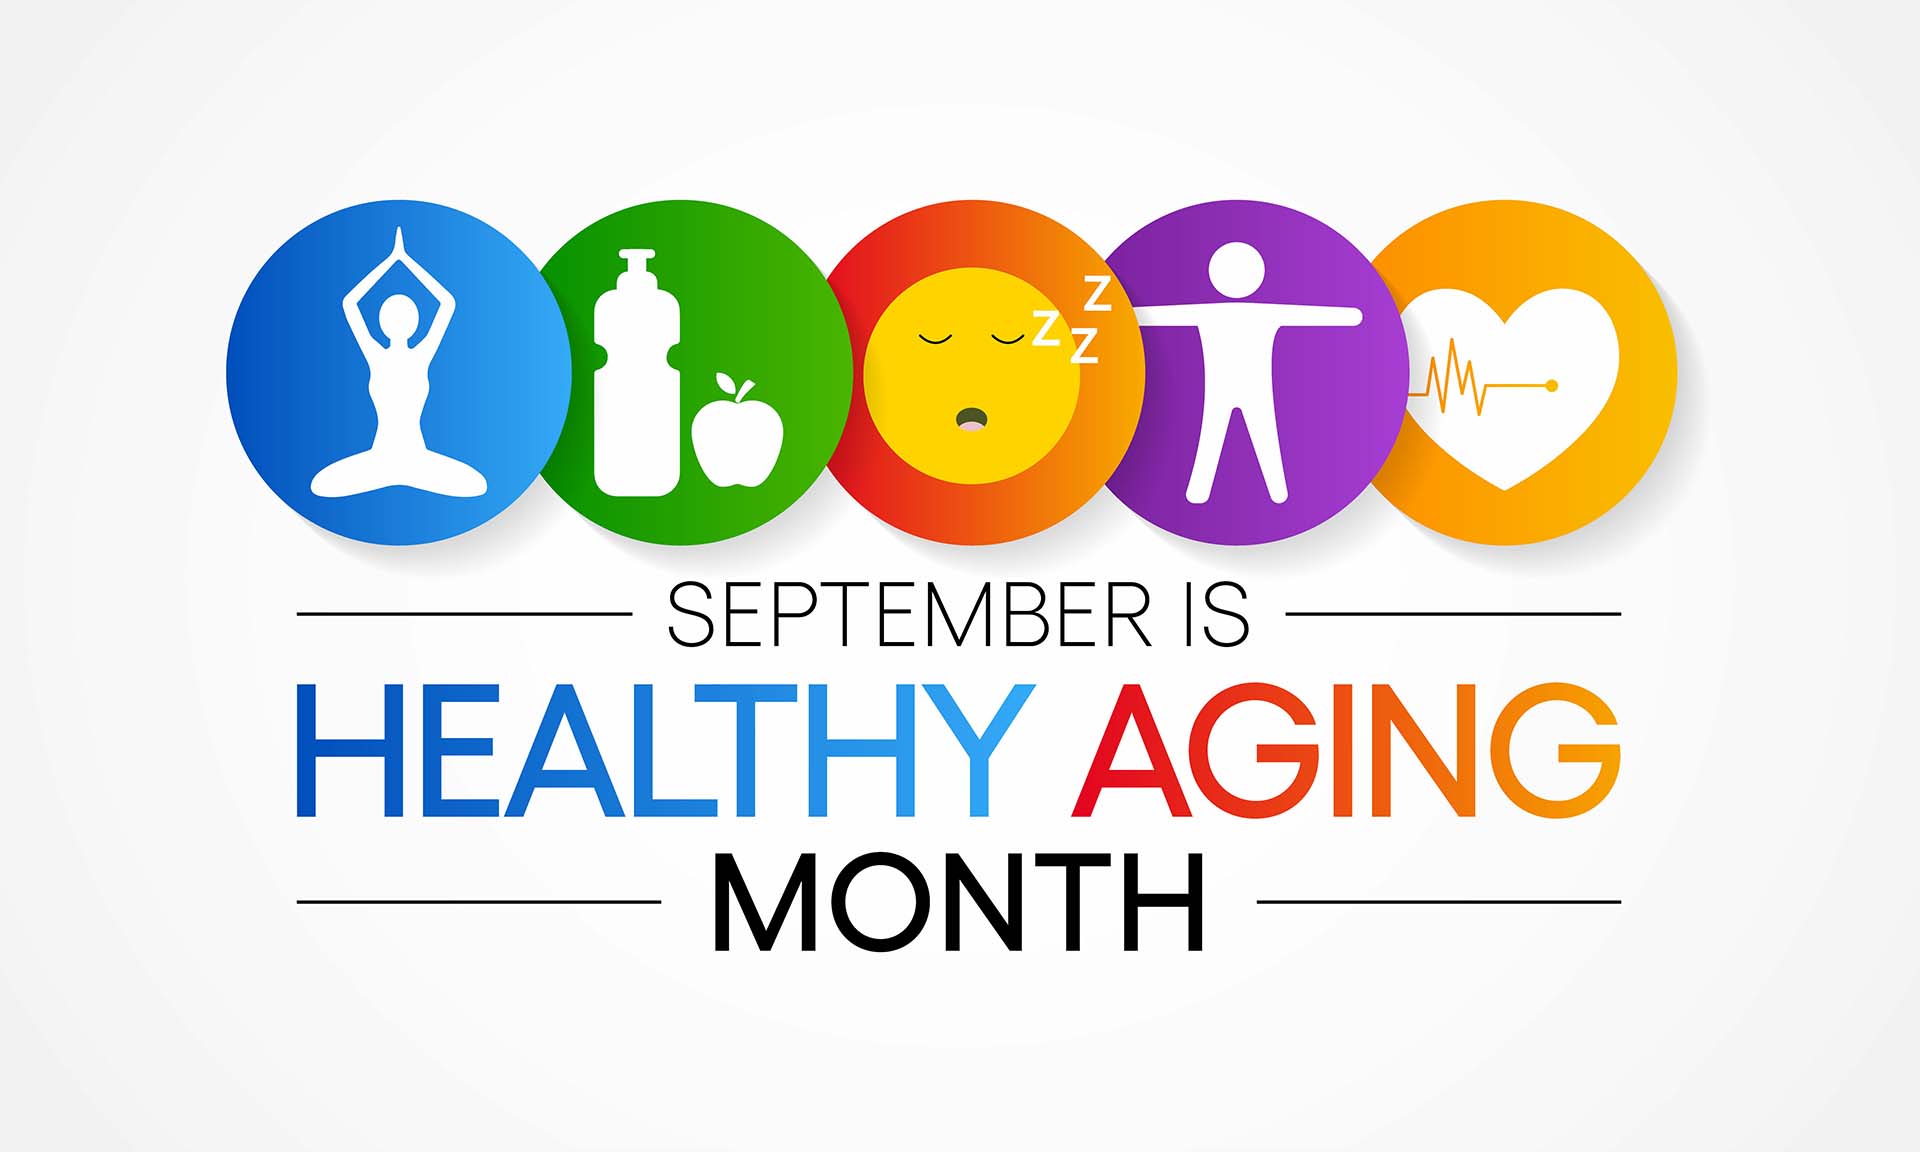 Nurturing Your Mind: September as Healthy Aging Month